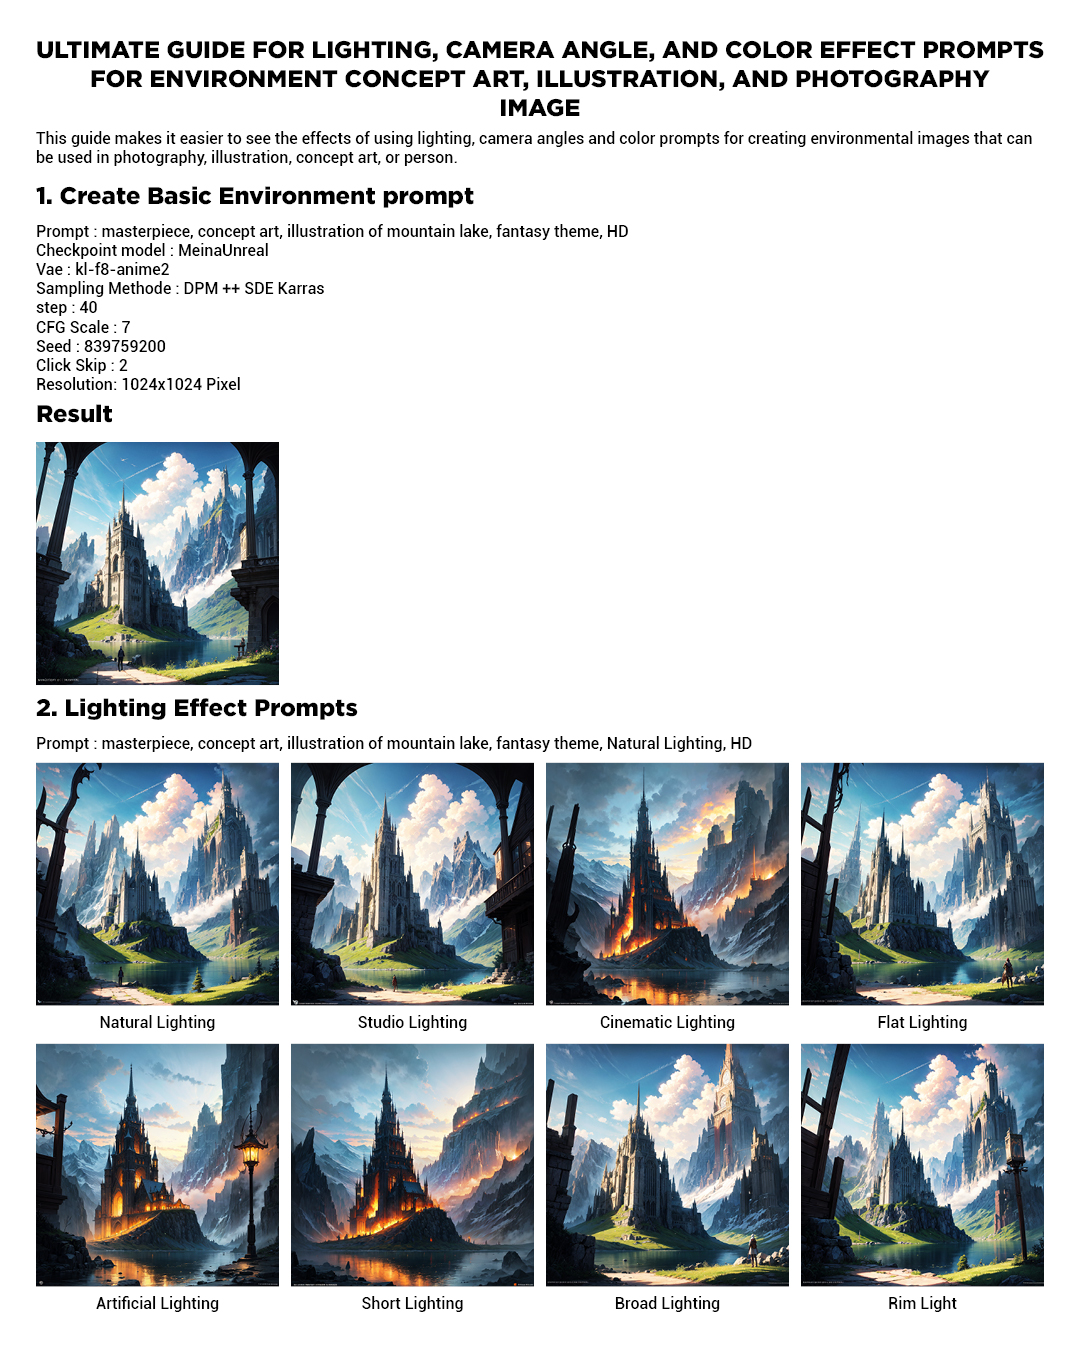 Ultimate Guide for Camera, Lighting and Color Prompts for Environment image